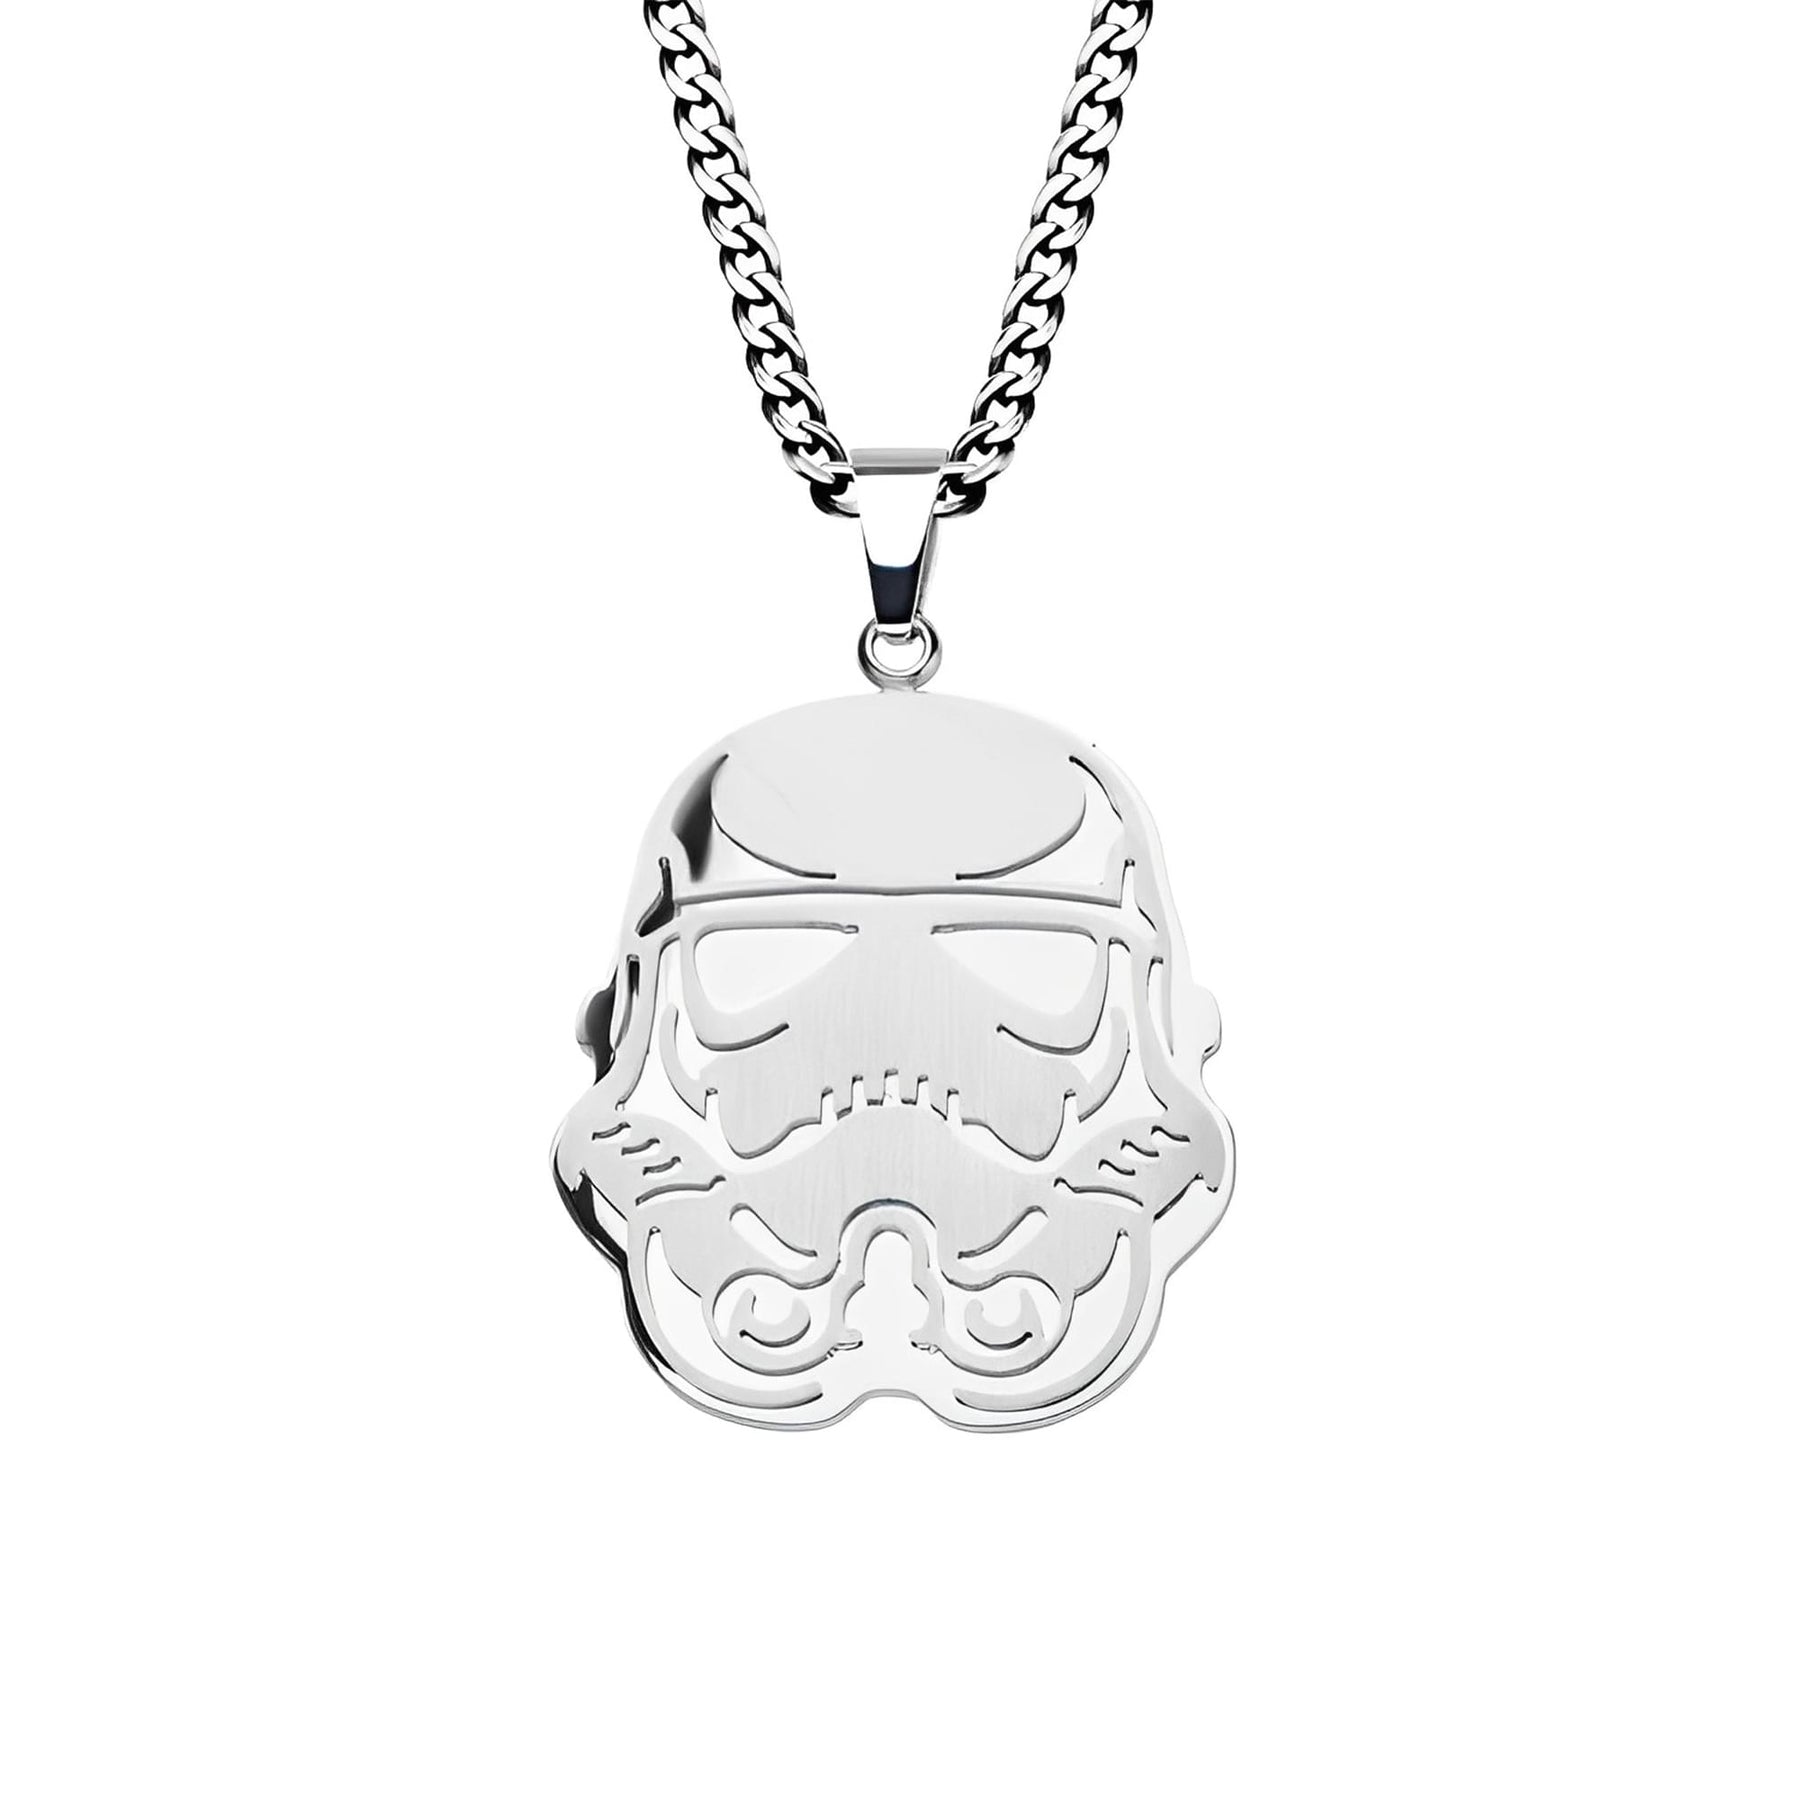 Star Wars Stormtrooper Stainless Steel 24" Chain Pendant Necklace